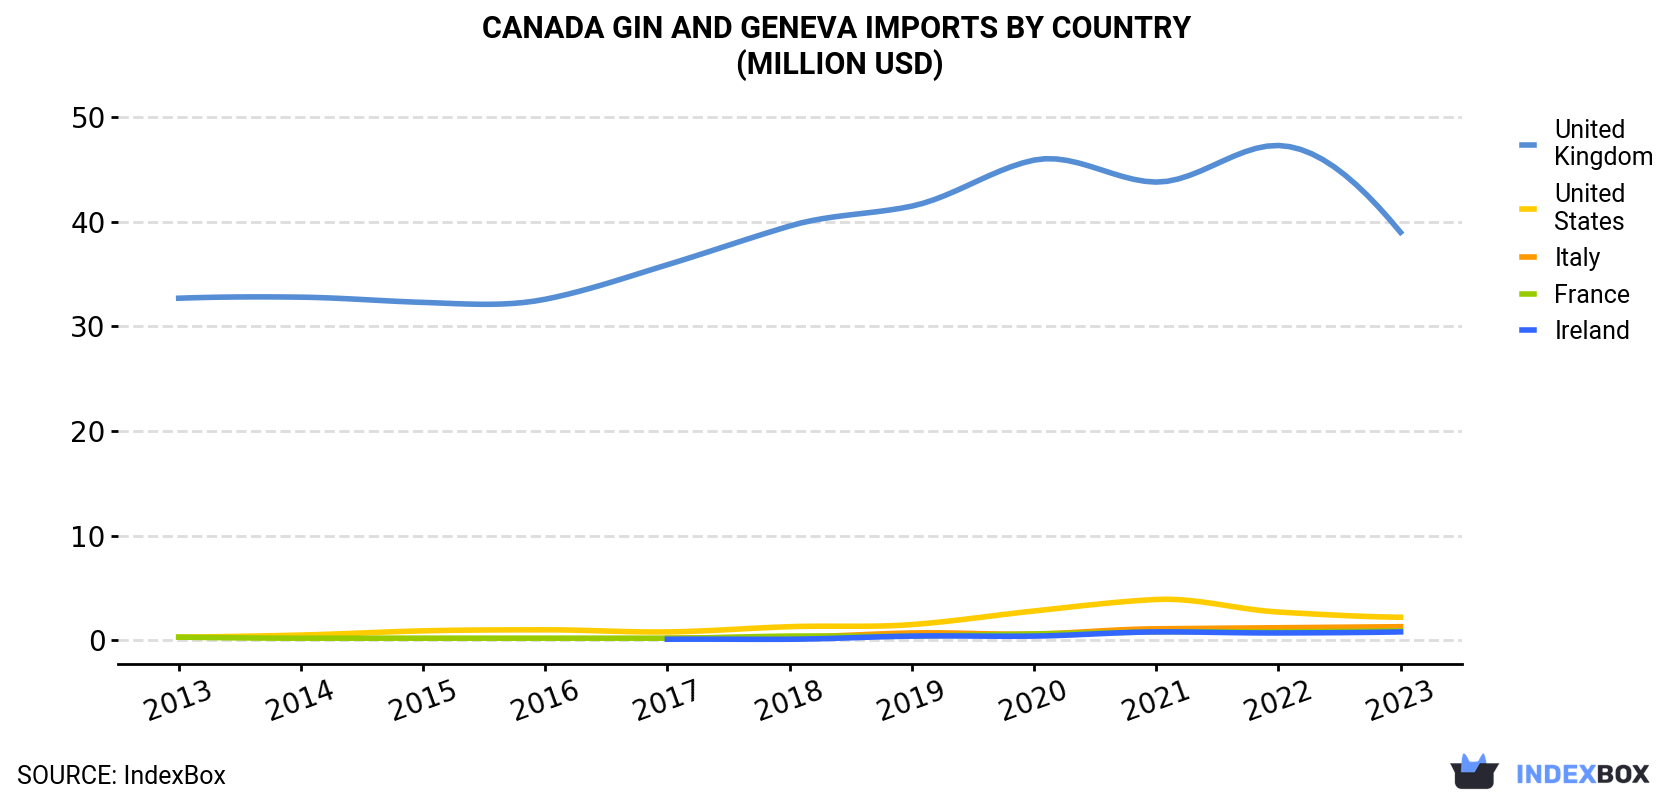 Canada Gin And Geneva Imports By Country (Million USD)